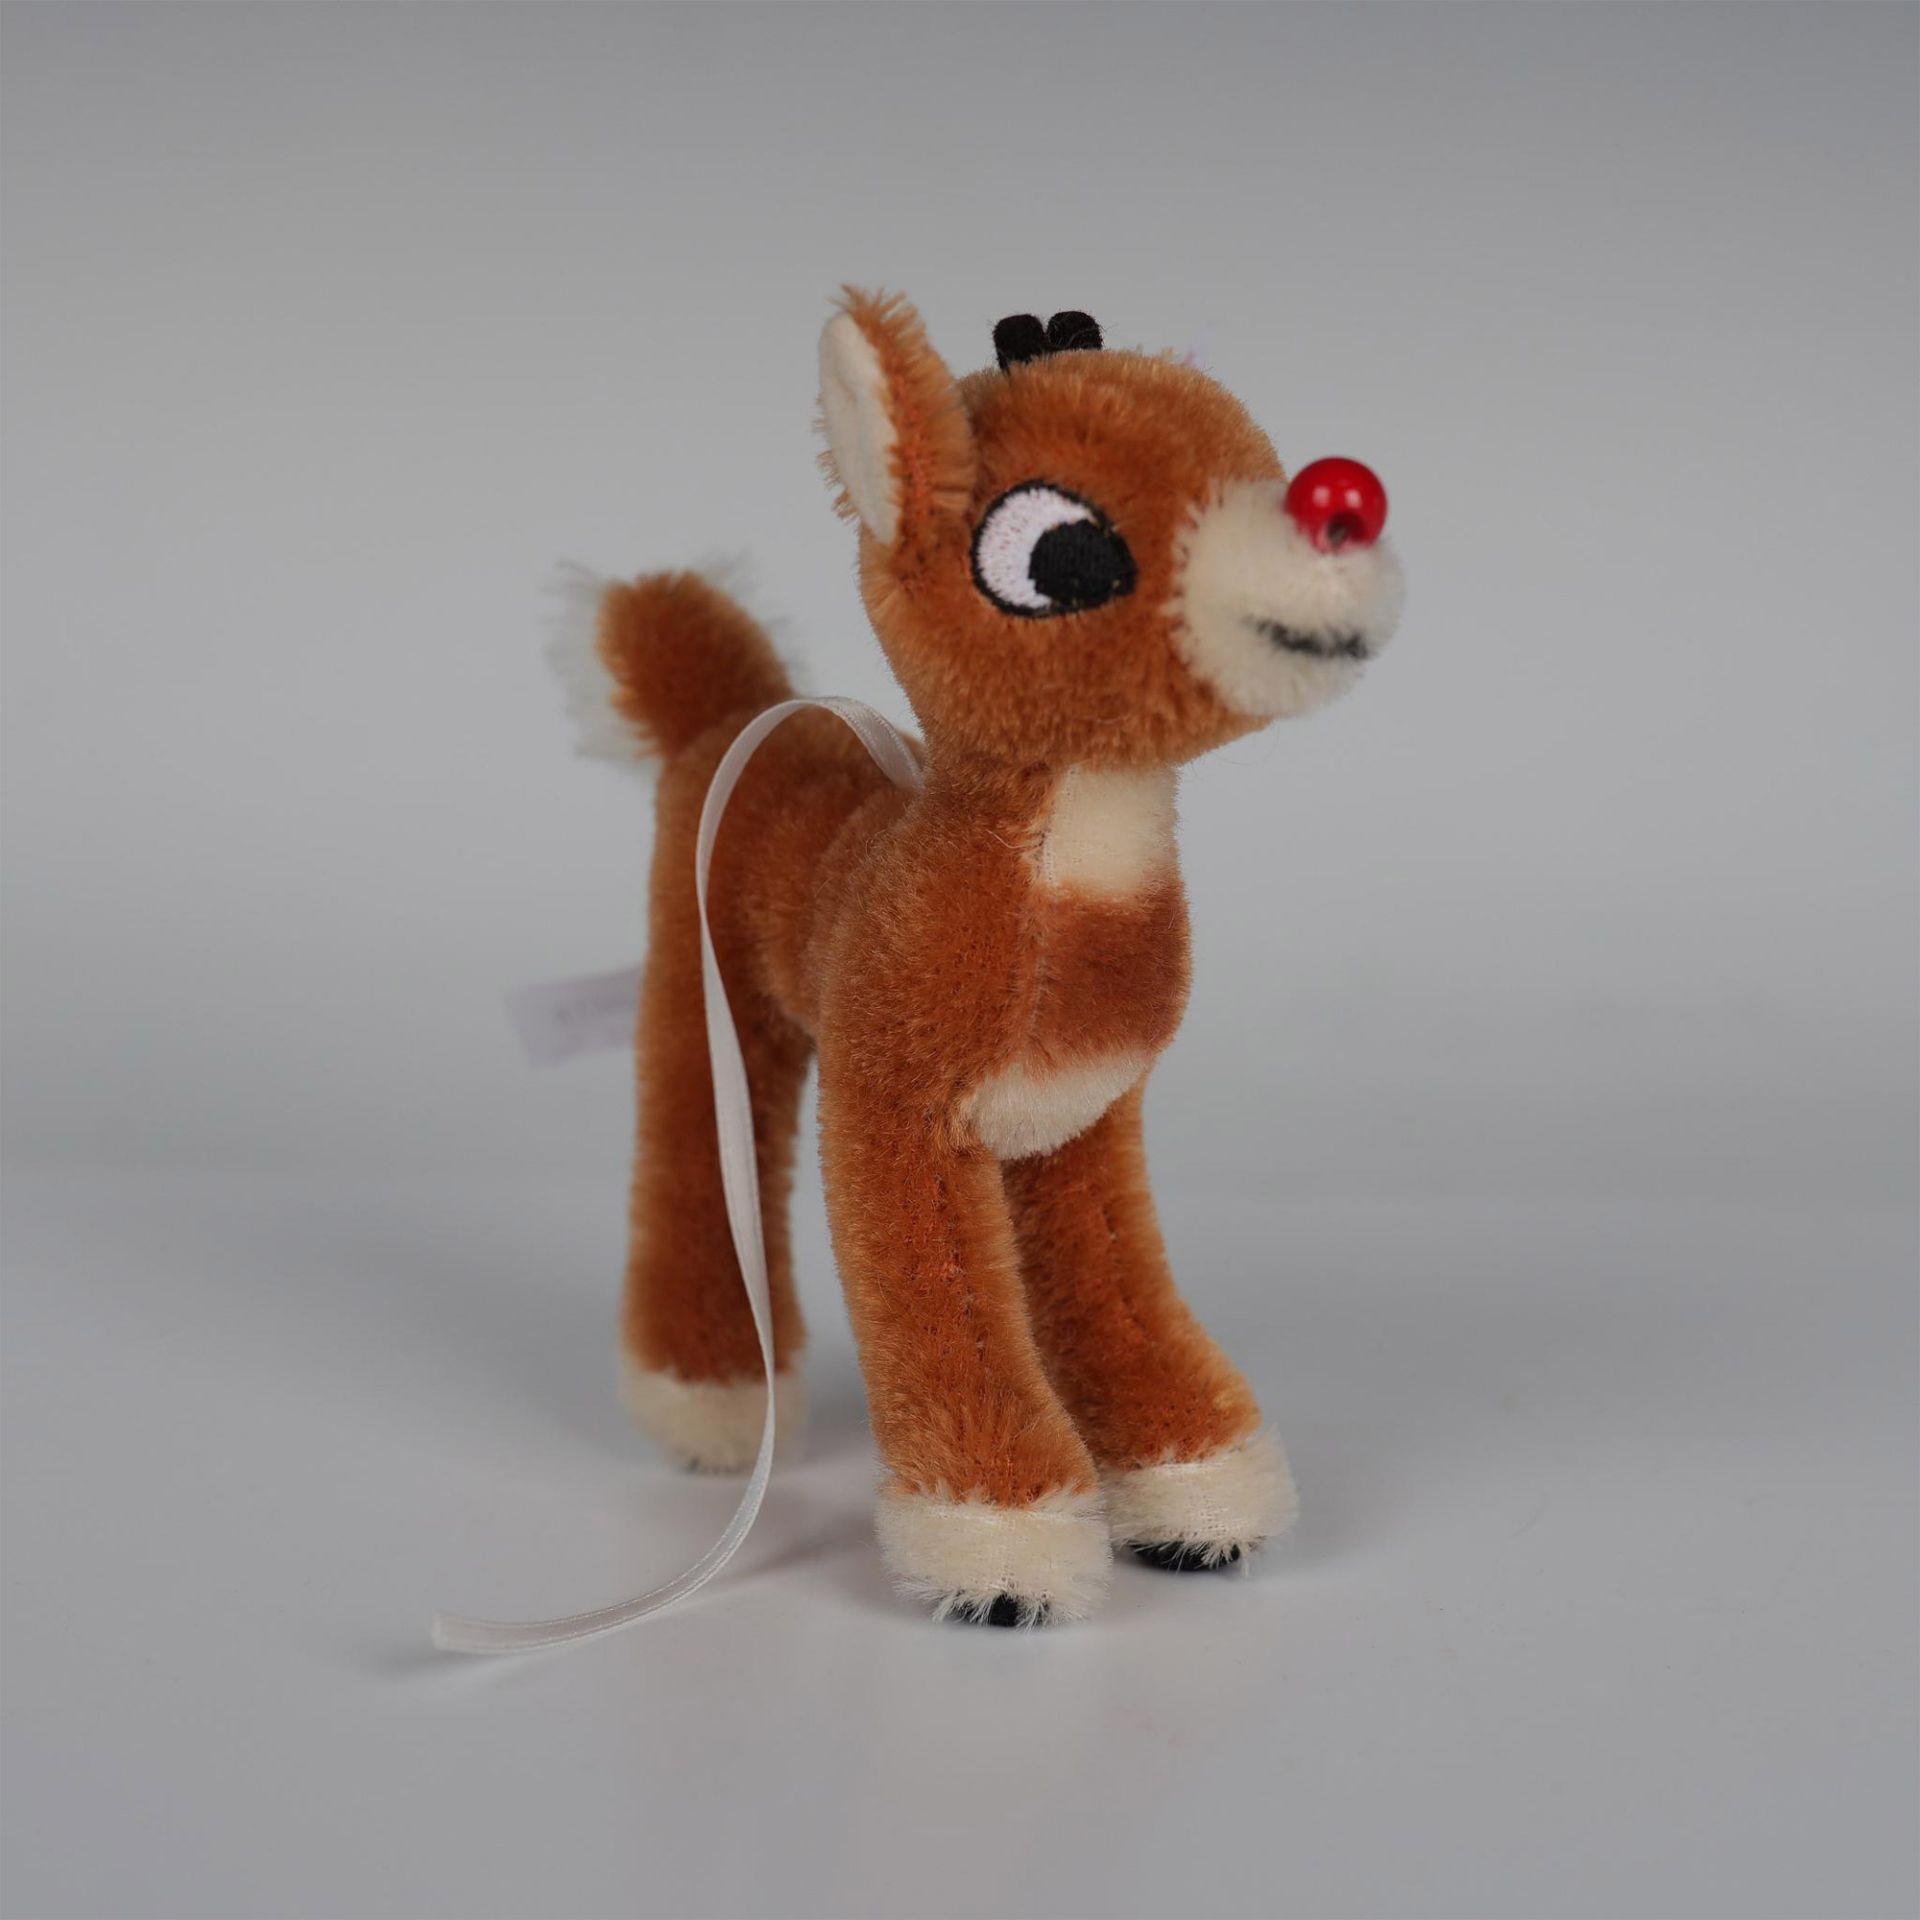 Steiff North American Rudolph the Red-Nosed Reindeer - Image 2 of 5